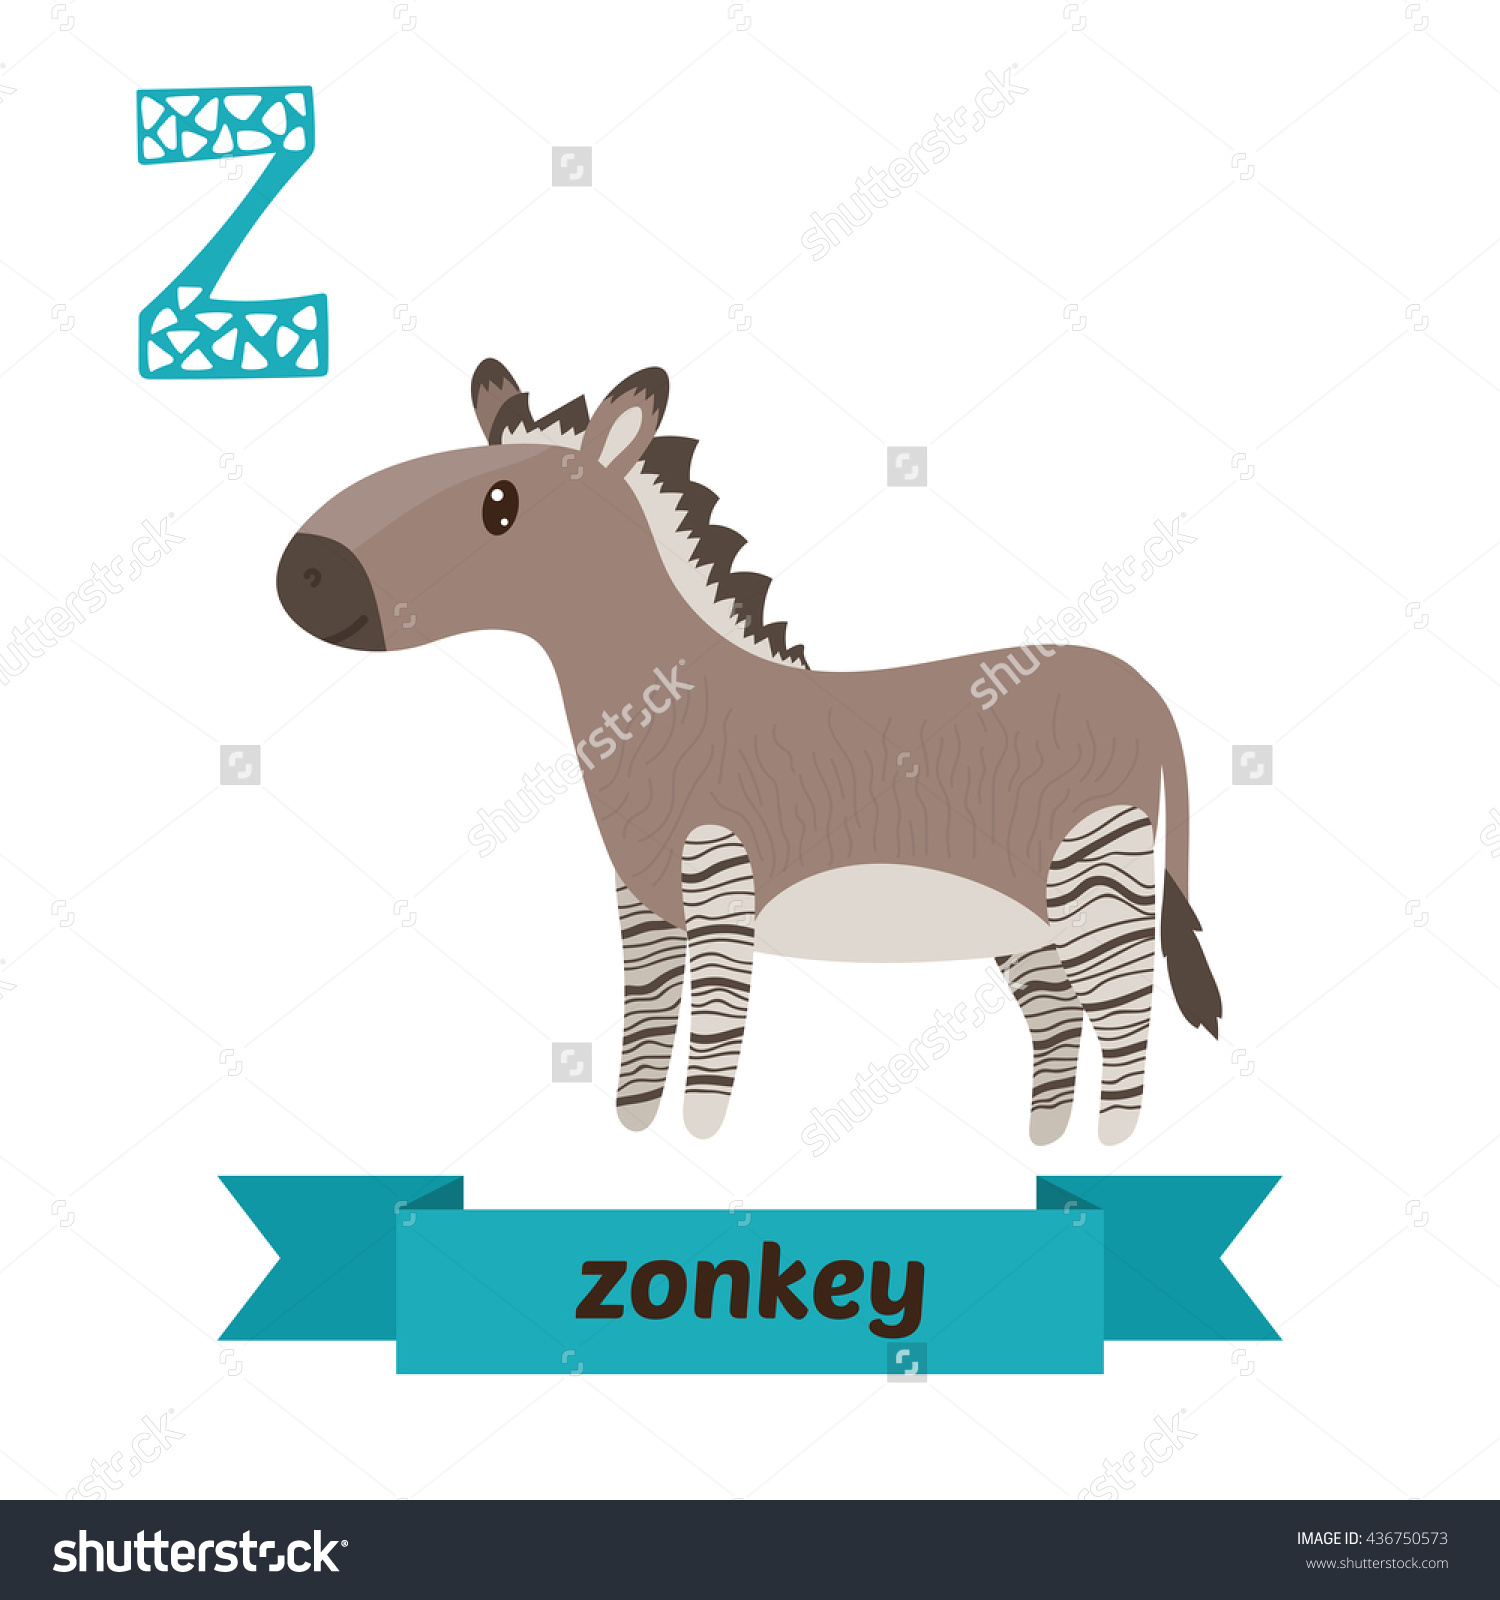 Zonkey clipart #16, Download drawings